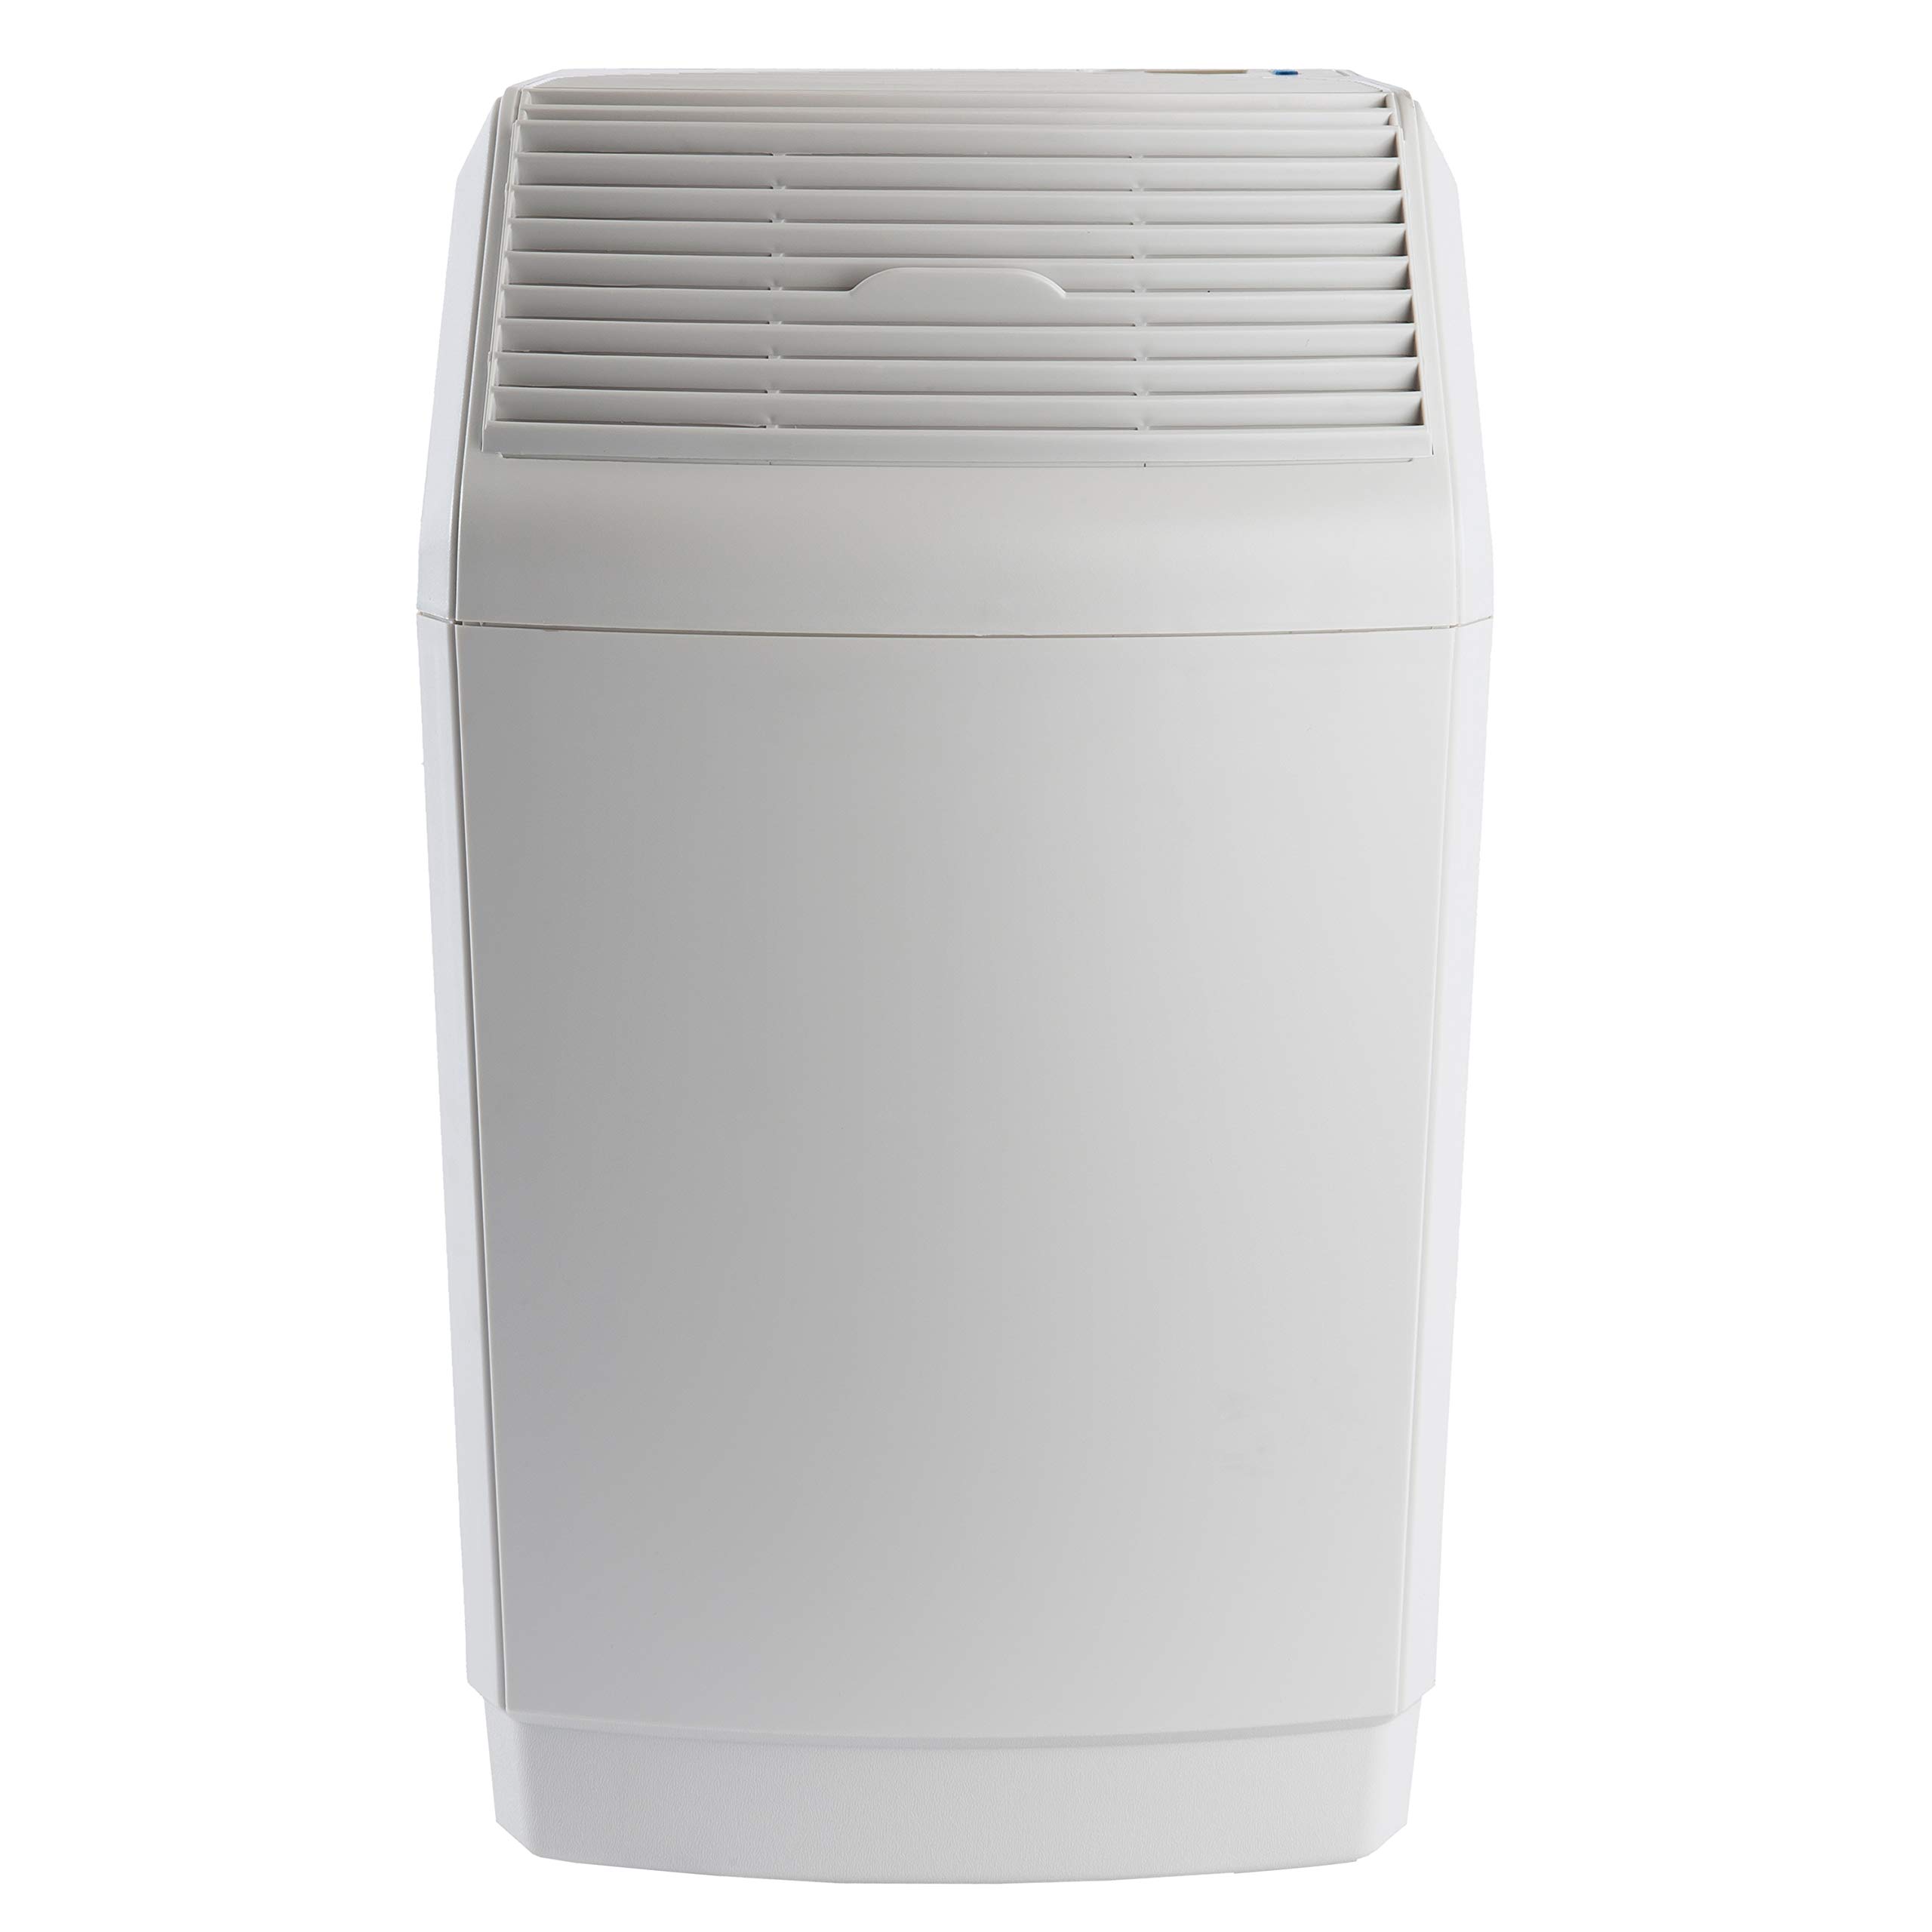 AIRCARE Space Saver Large Evaporative Whole House Commercial 6 Gallon Humidifier for Large Rooms 2,700 sq ft. With Digital Controls, Auto Humidistat and Automatic Shut Off